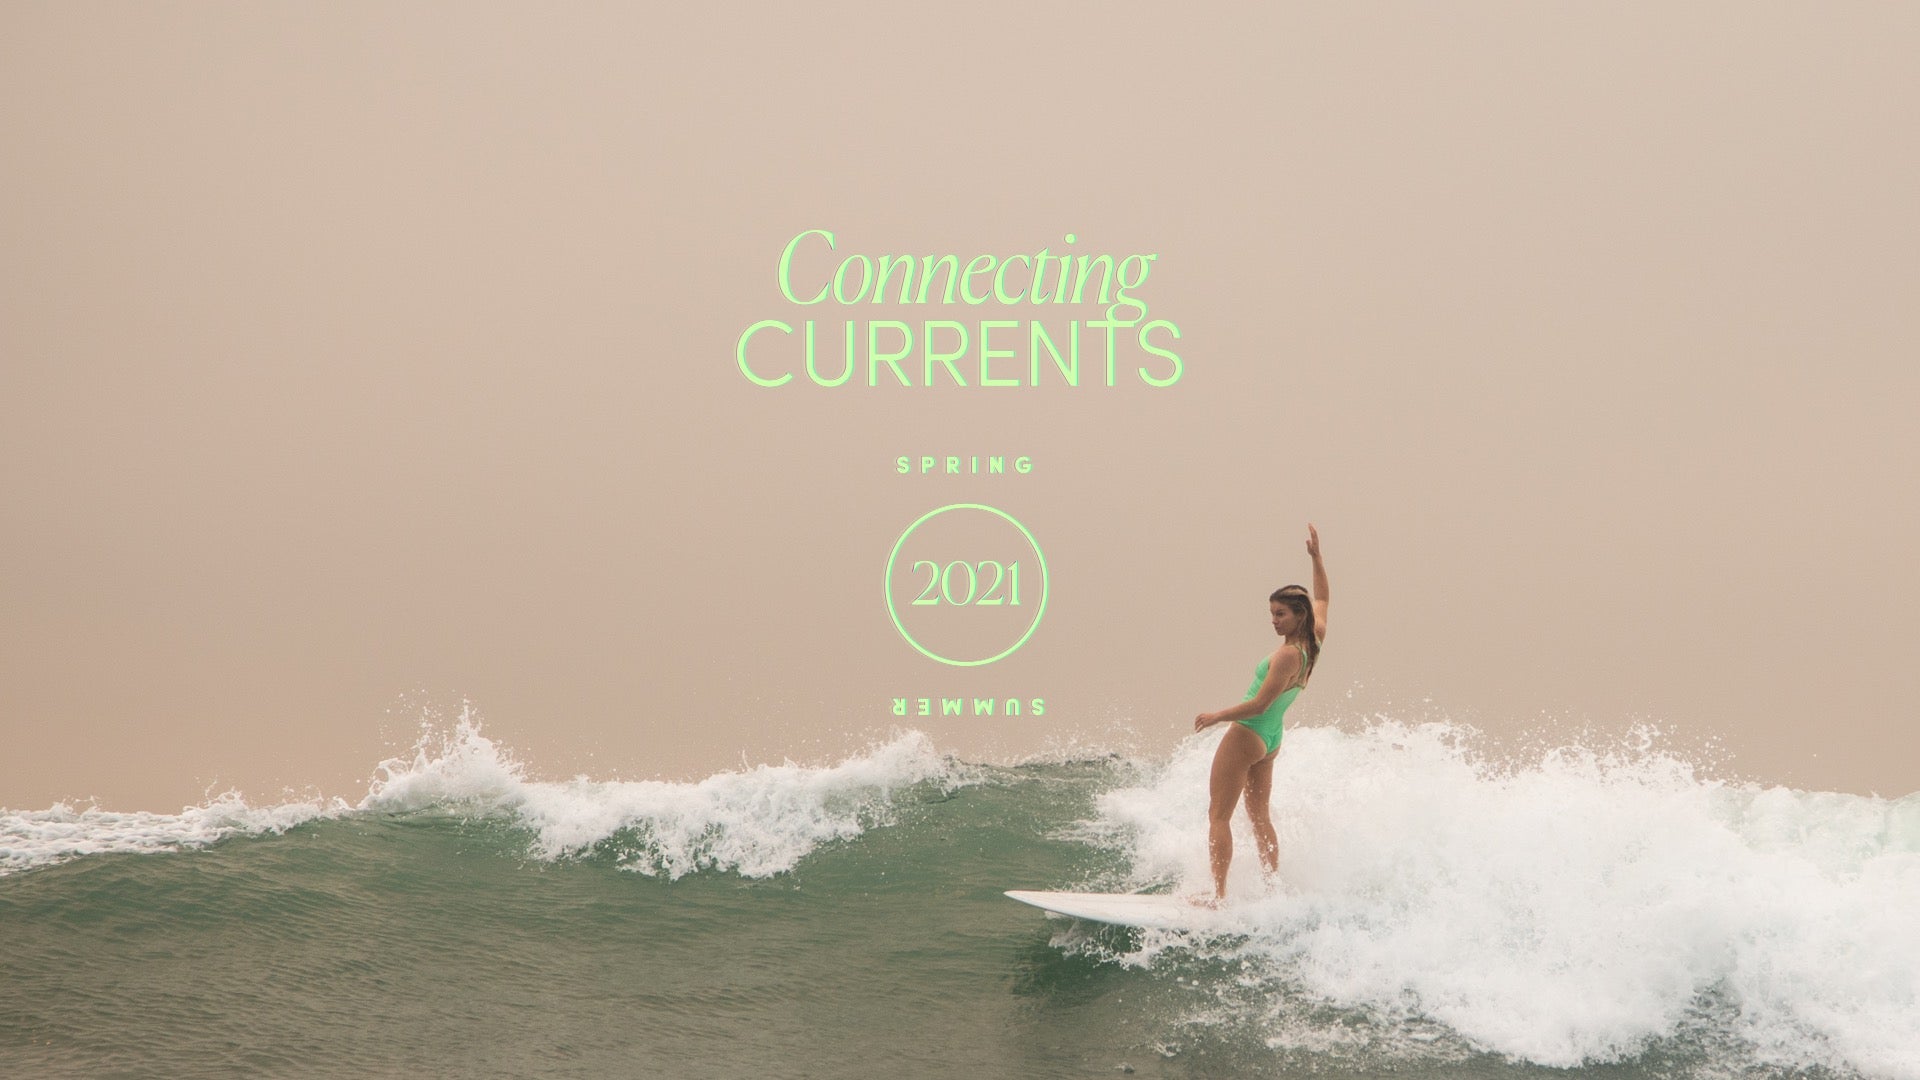 Connecting Currents Surf Movie